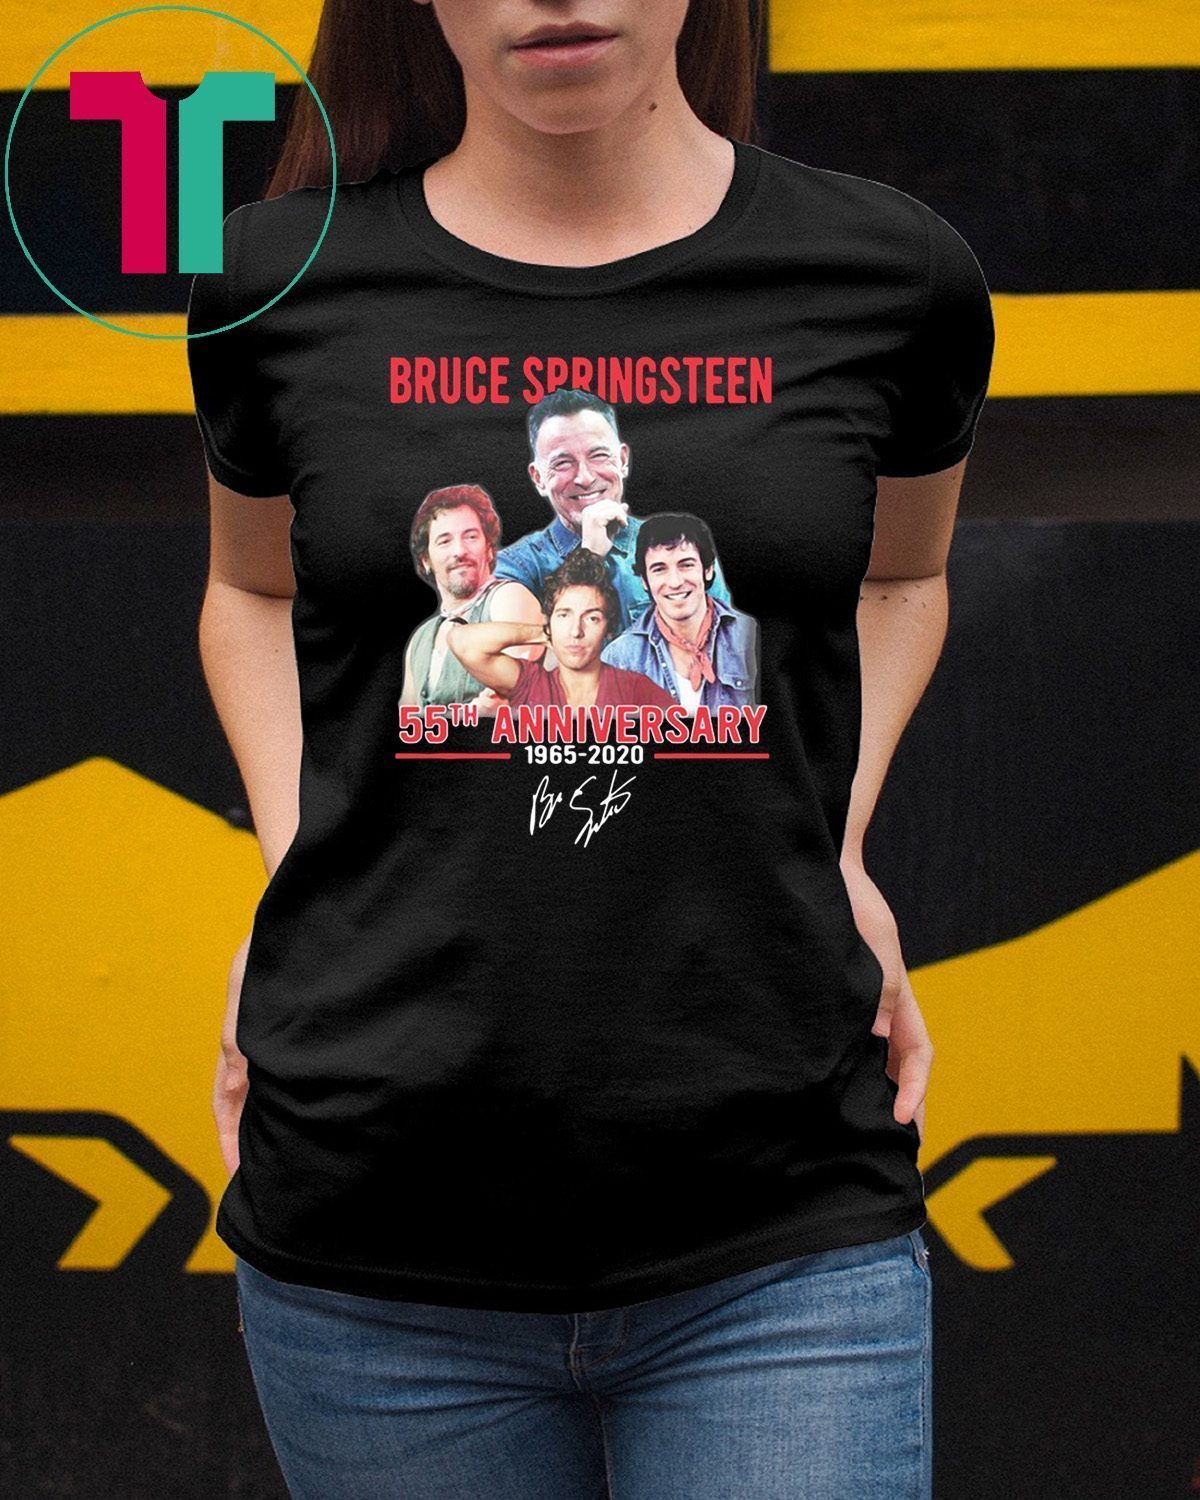 Bruce springsteen 55th anniversary 1965-2020 signatures shirt ...